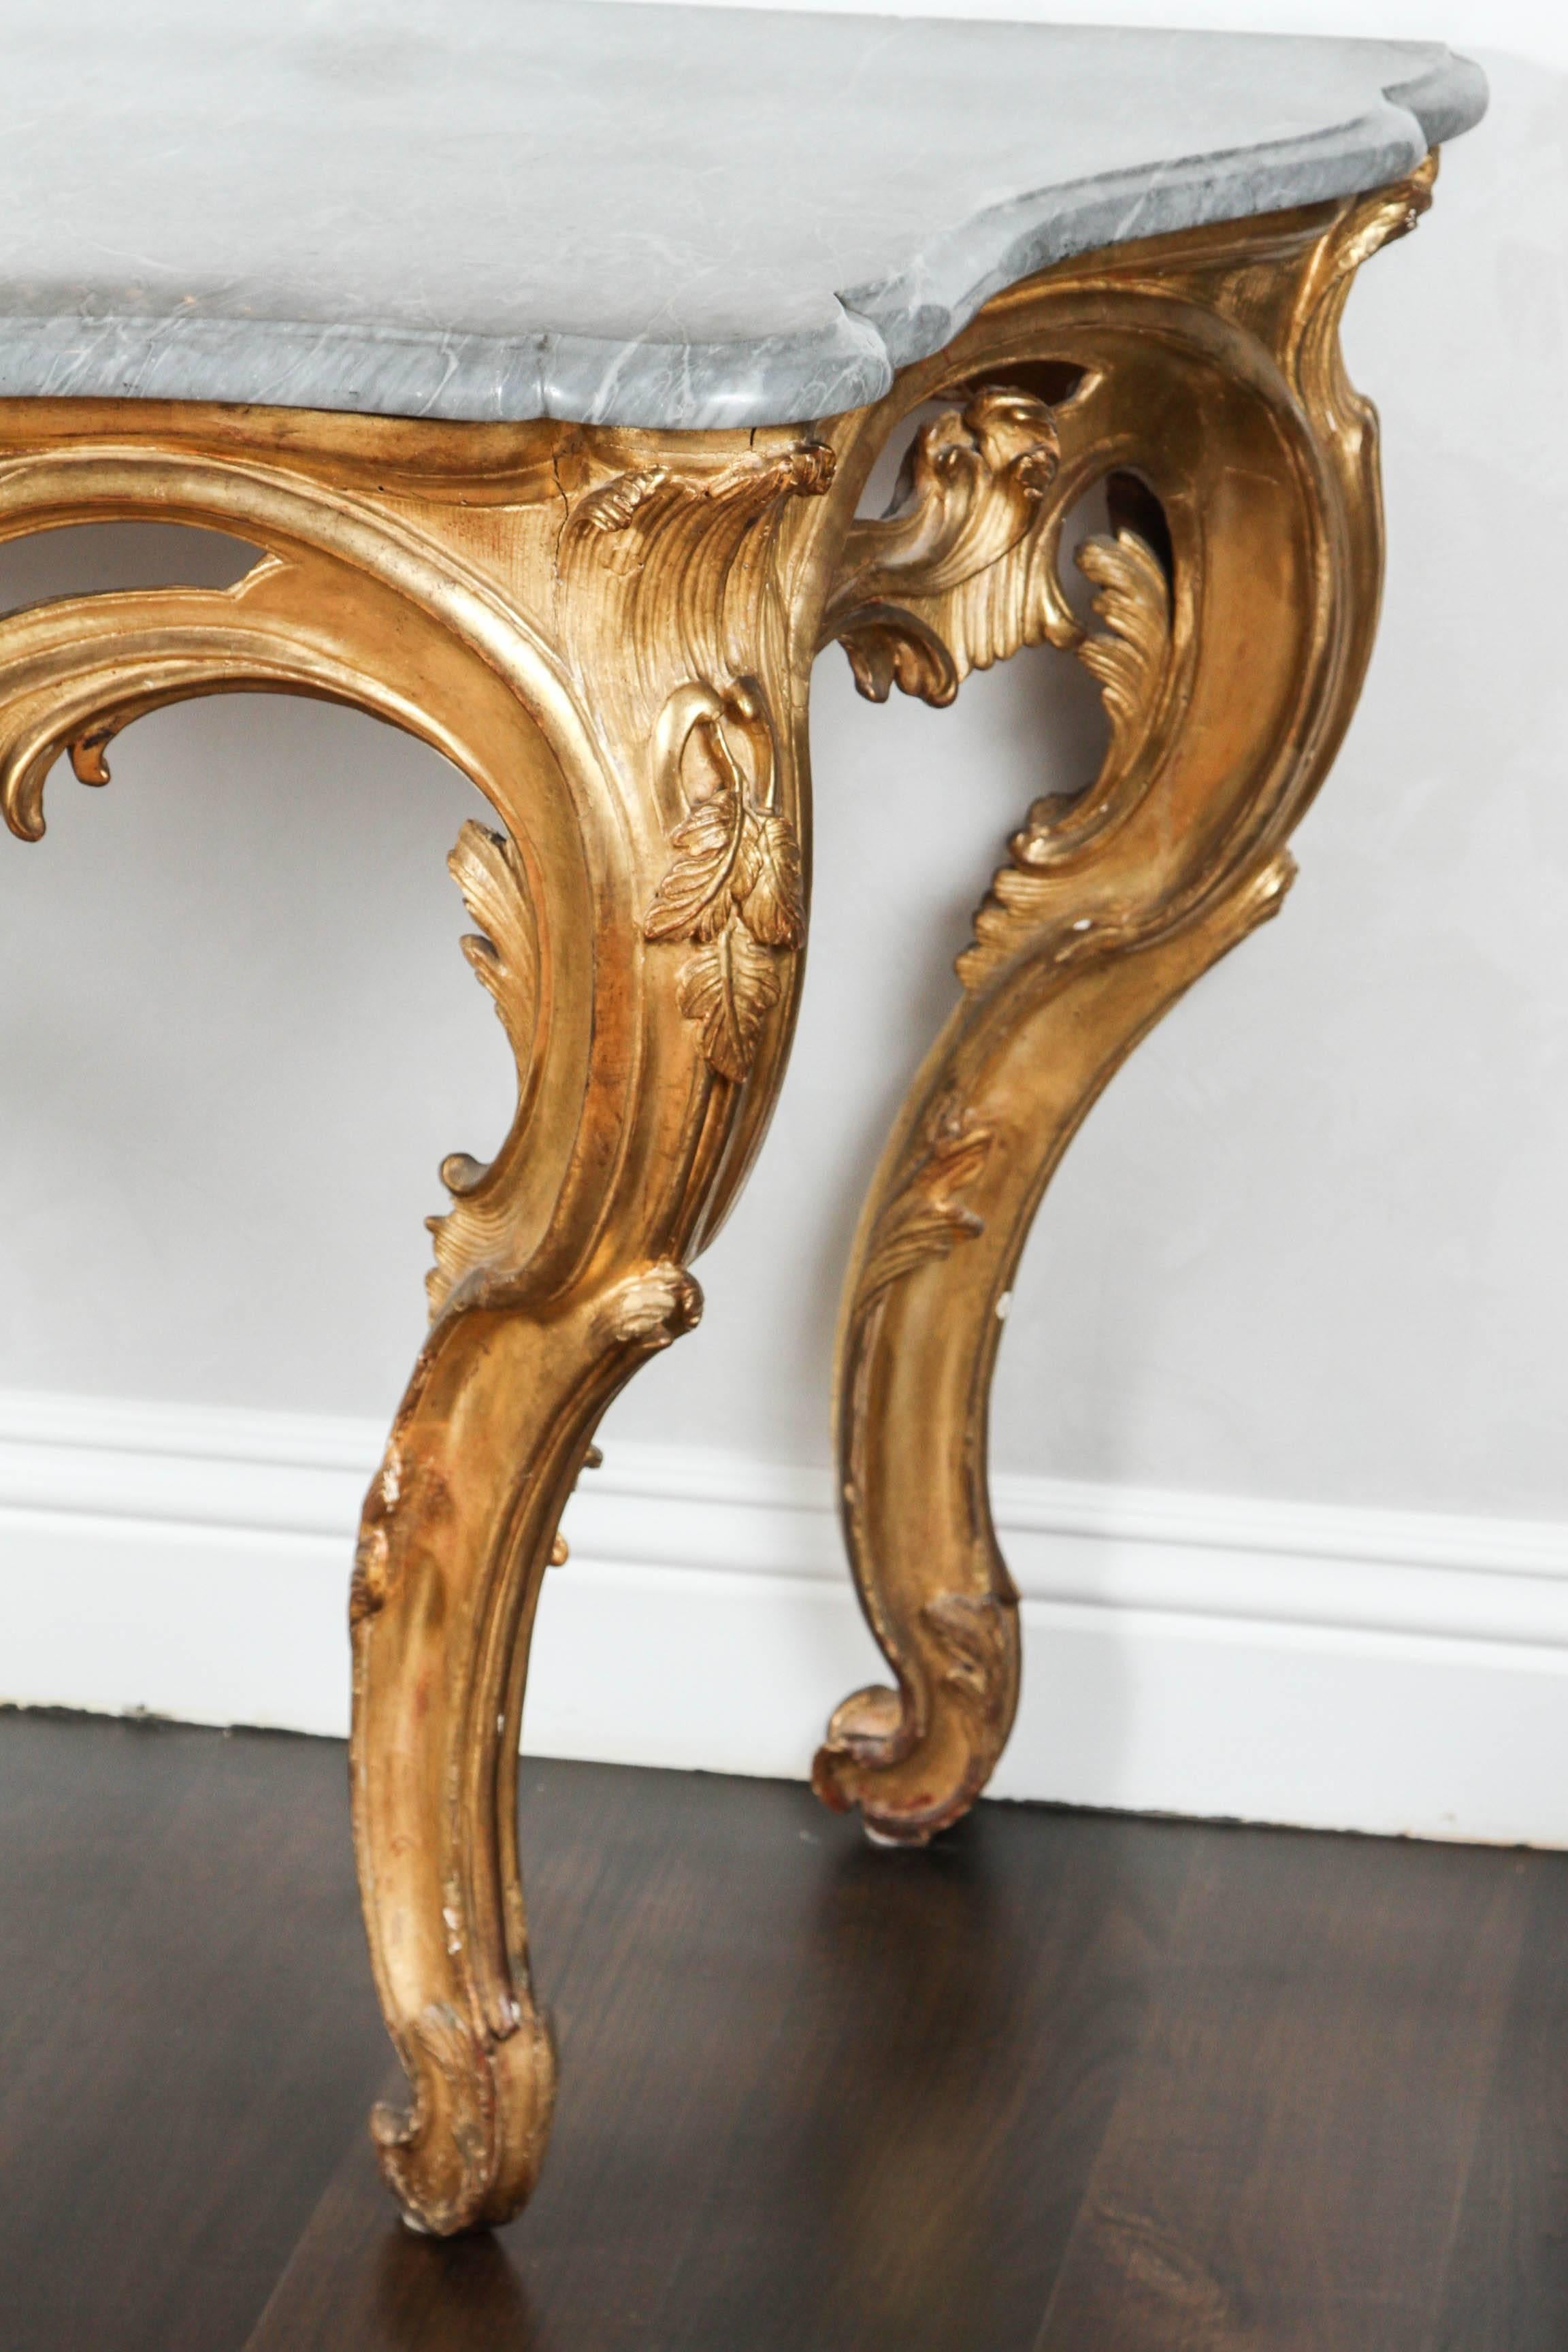 Late 18th-19th century French giltwood console with original gray marble-top and leaf motif.